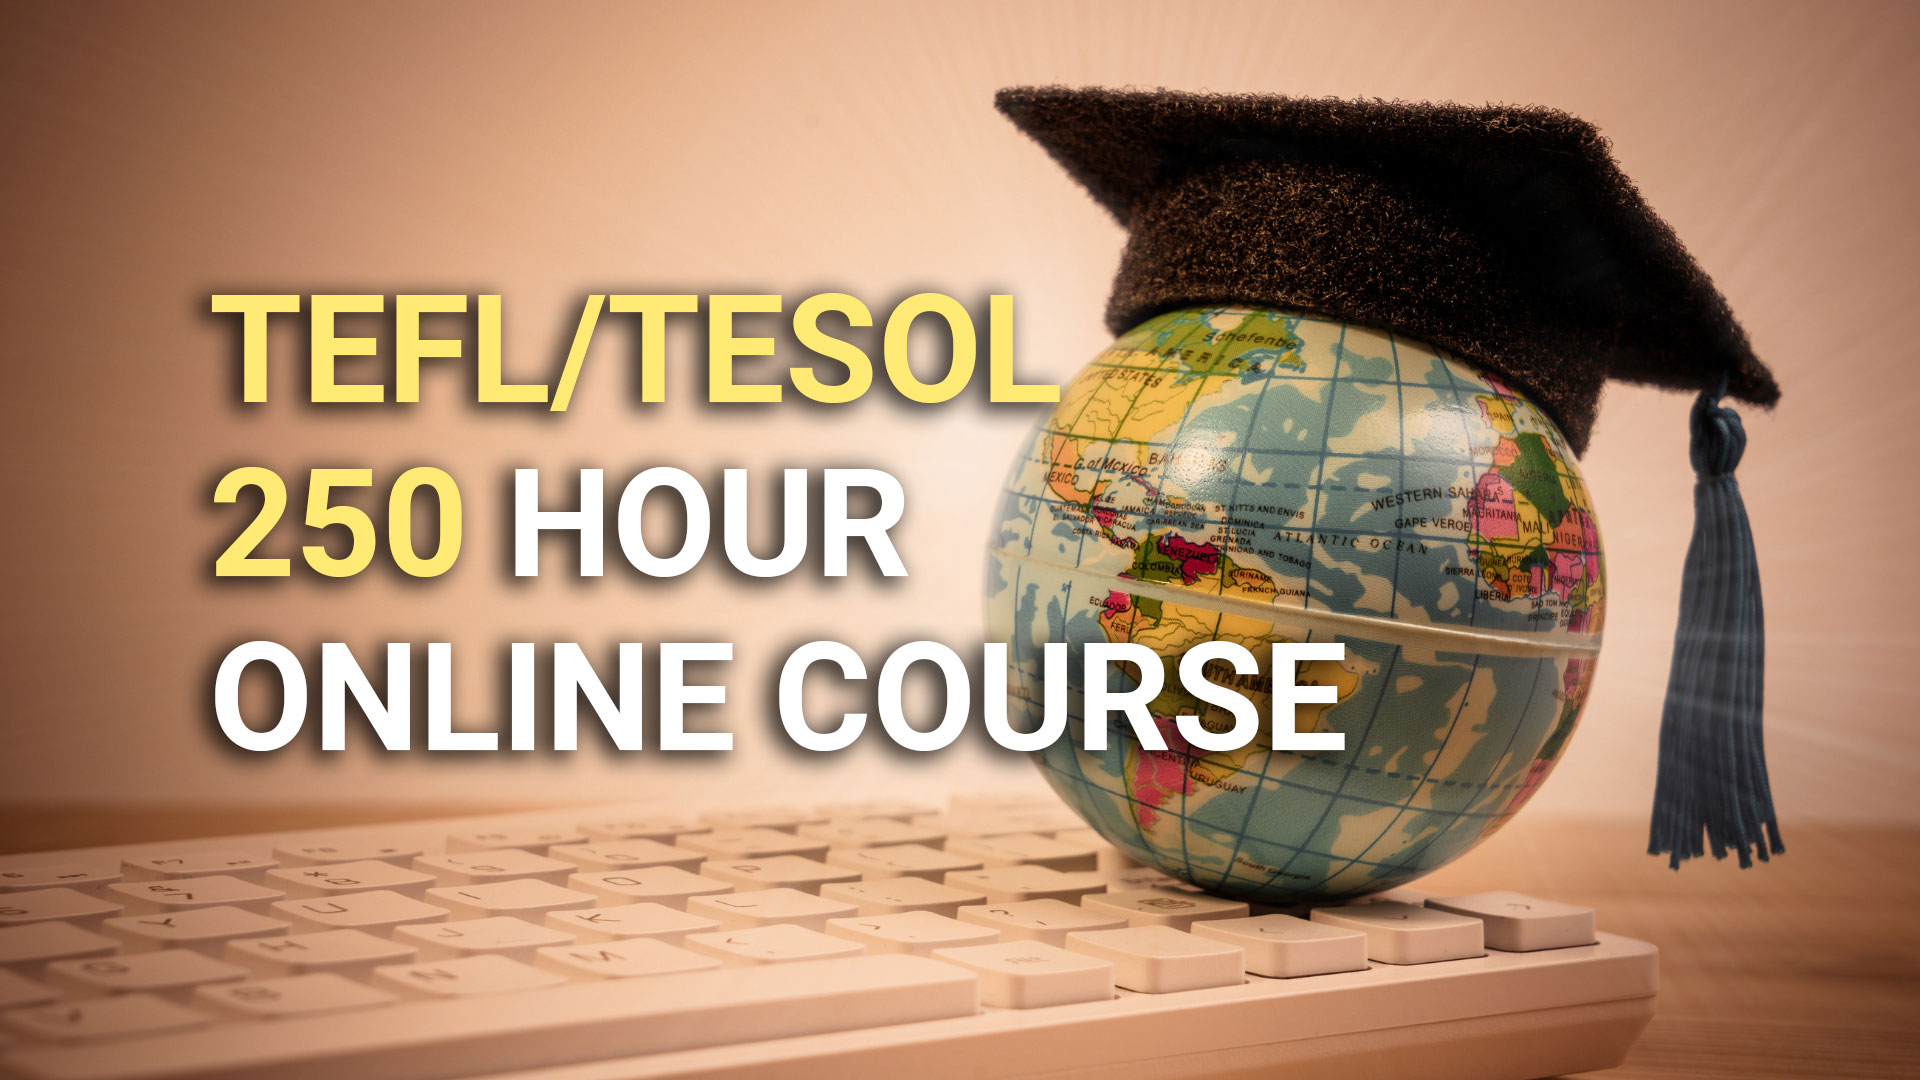 TEFL/TESOL 250 hour online course